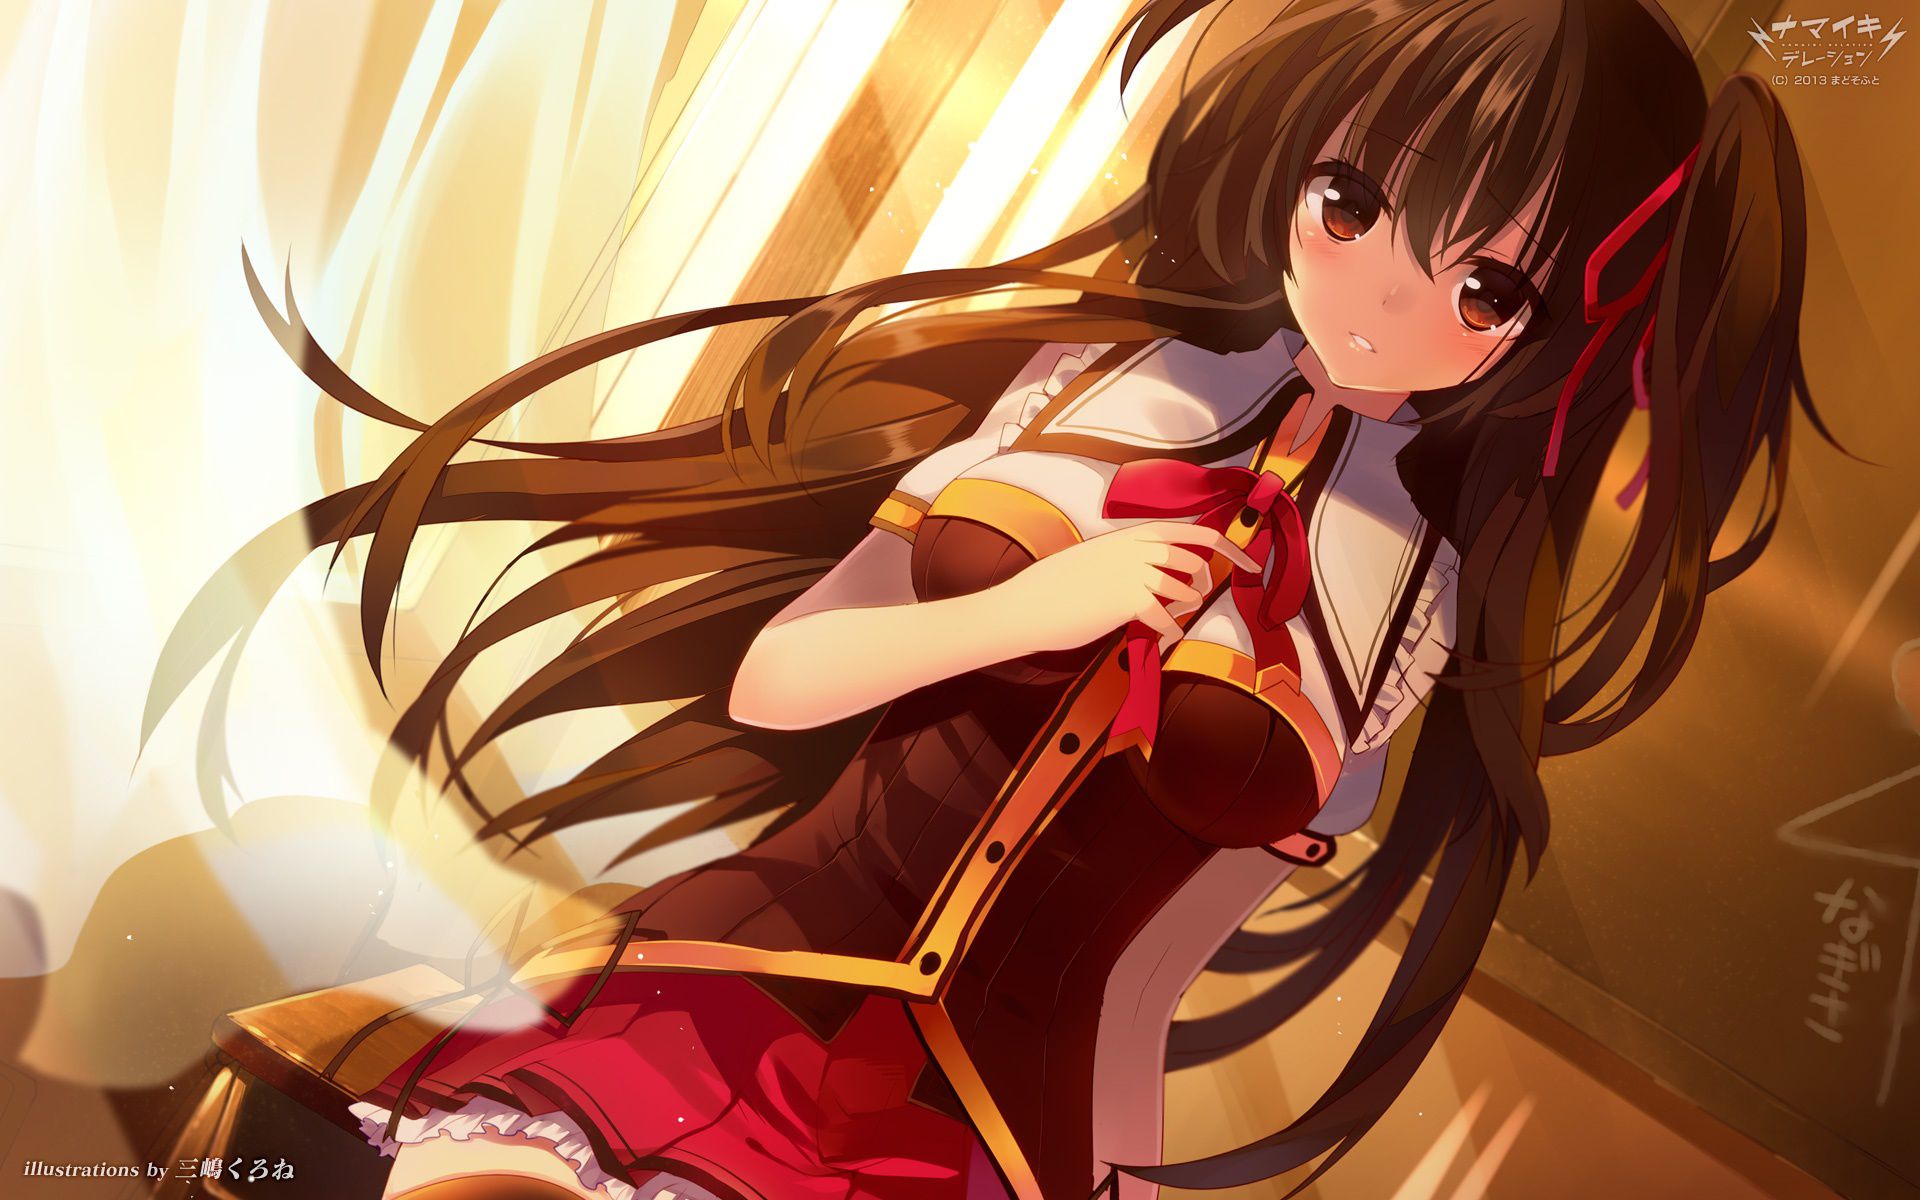 Namickideration [under age 18 prohibited eroge CG] wallpapers, images 4